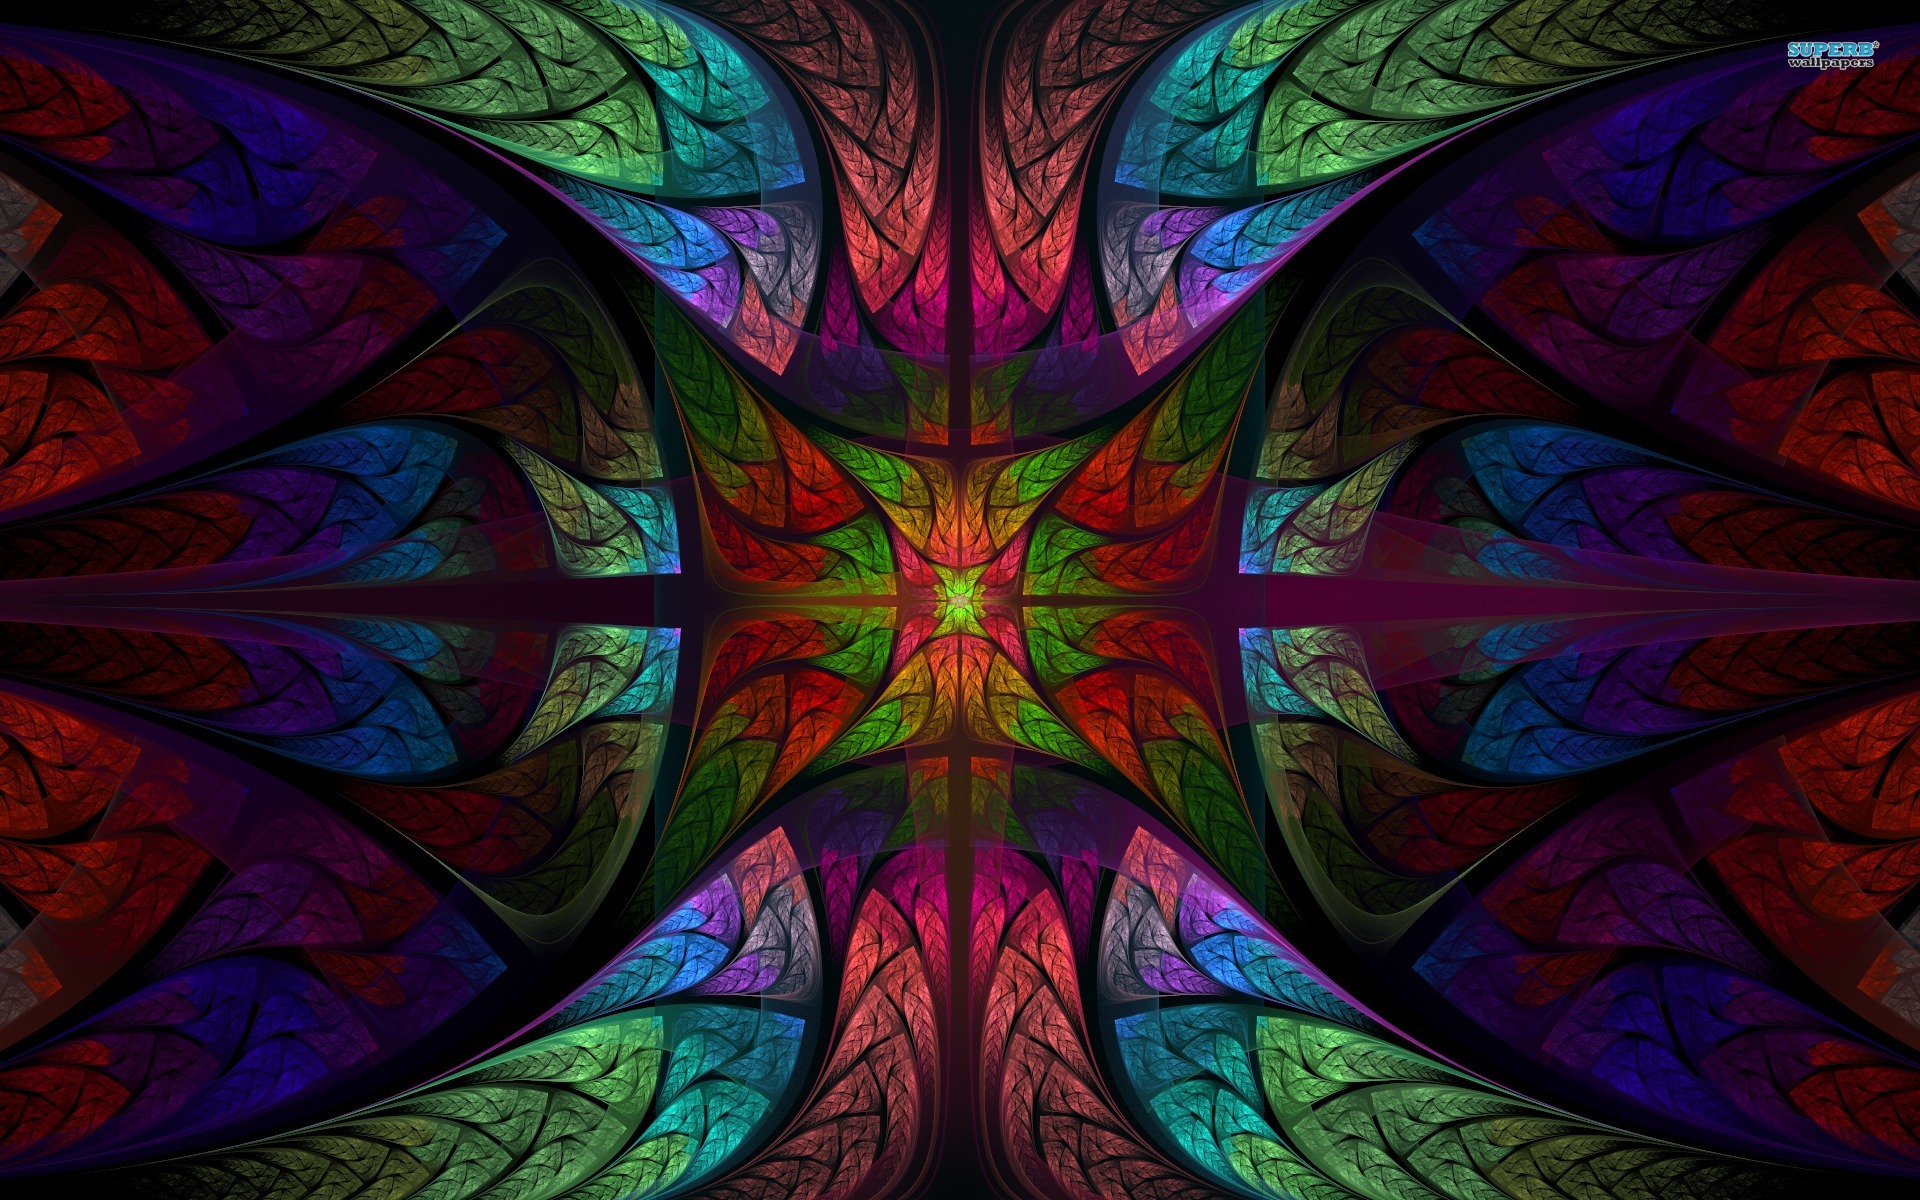 Stained-glass-wallpaper-9 33298 HD Wallpapers | Glefia.com